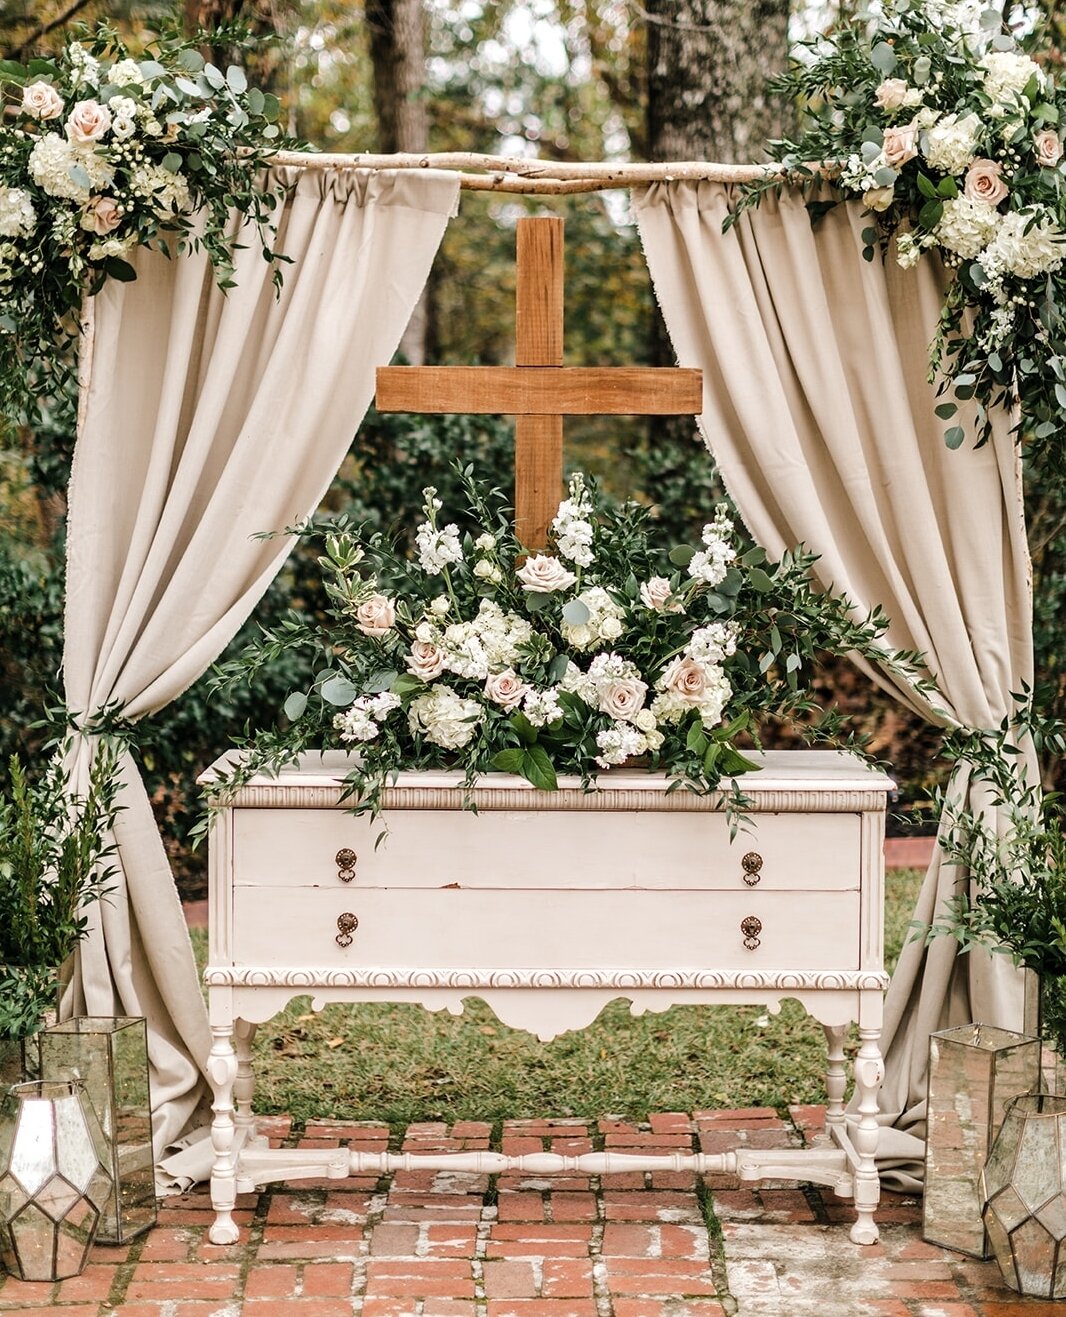 Regardless if you are envisioning your dream wedding venue or an intimate ceremony in a forest field, we can bring your vision to life because Miss Milly's brings *everything* to you! ⁠
⁠
Head over to missmillys.com to see the thousands of items to c